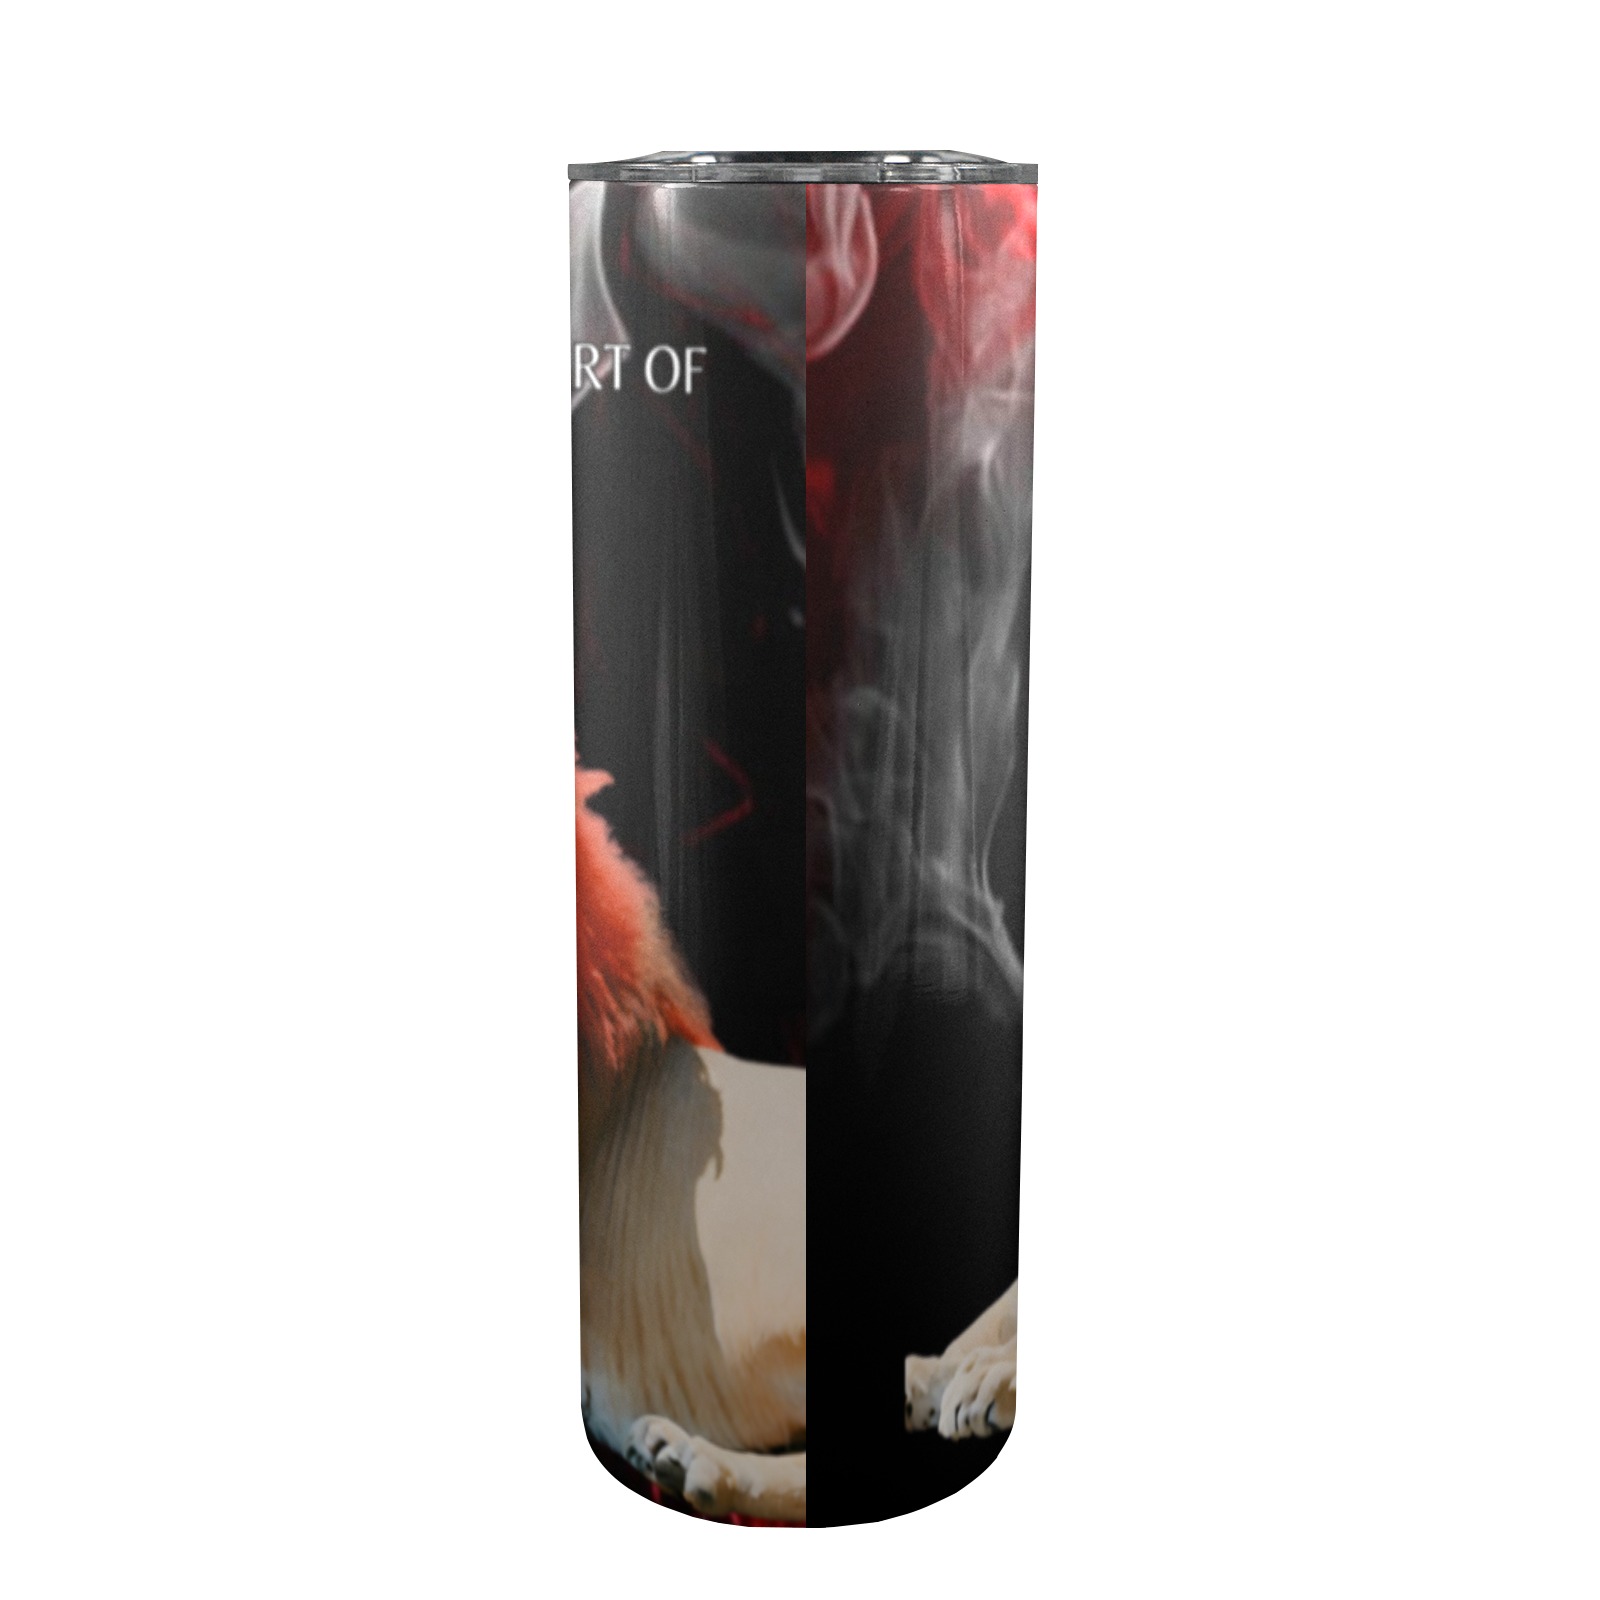 A lion sleeps in the heart of every brave man 20oz Tall Skinny Tumbler with Lid and Straw